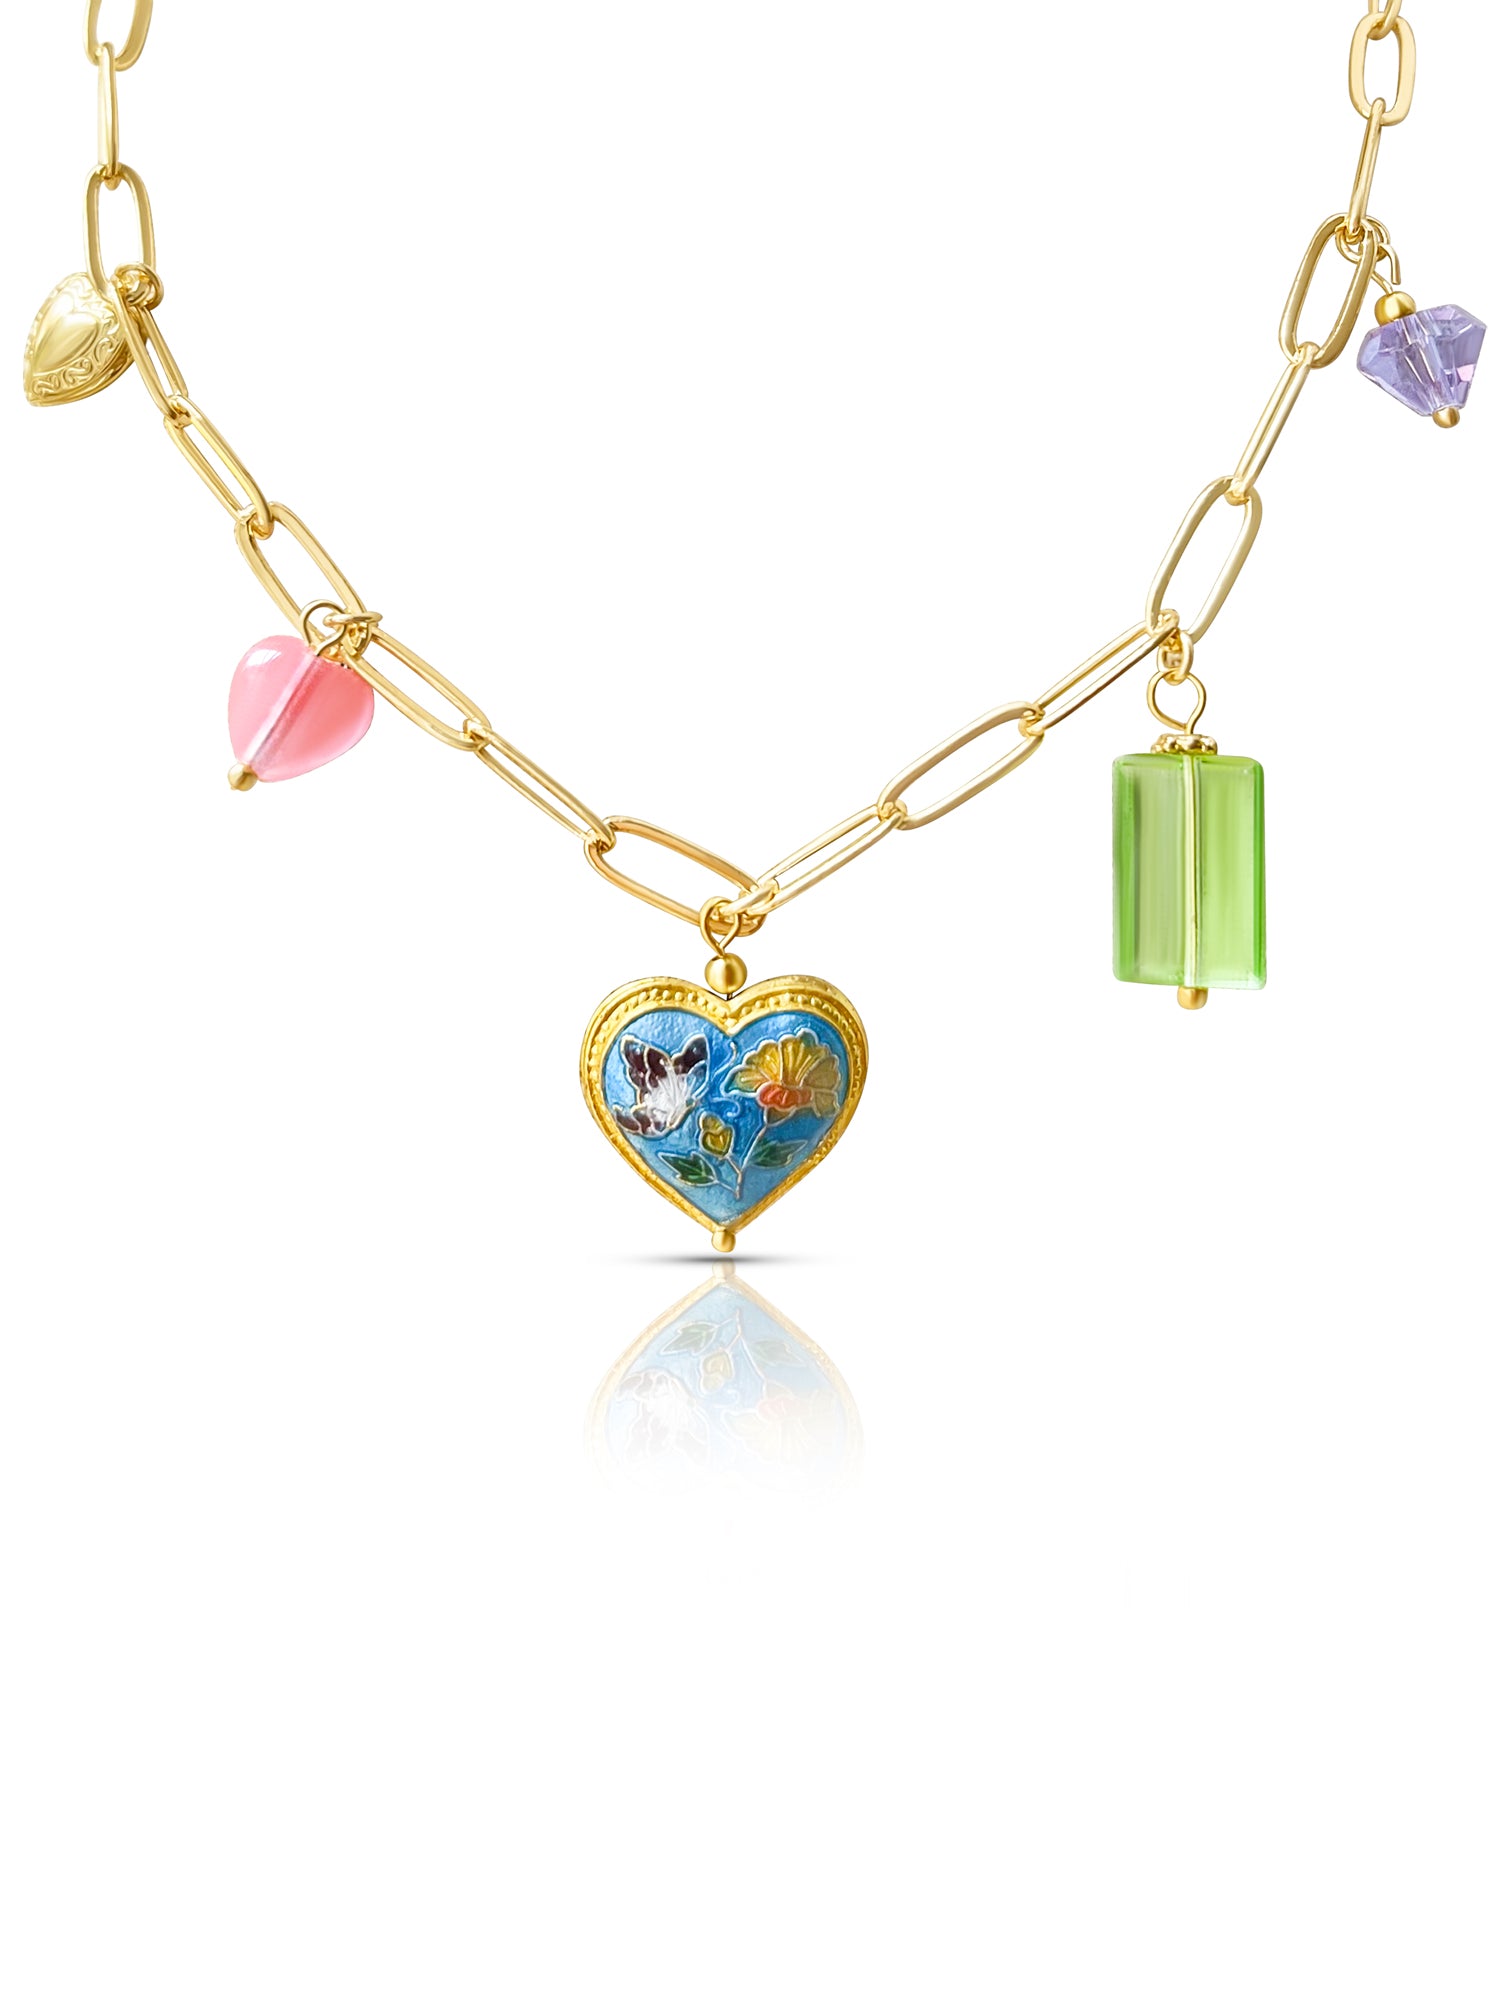 Heart Cloisonne Charm Necklace - Blue Heart/Glass Crystals